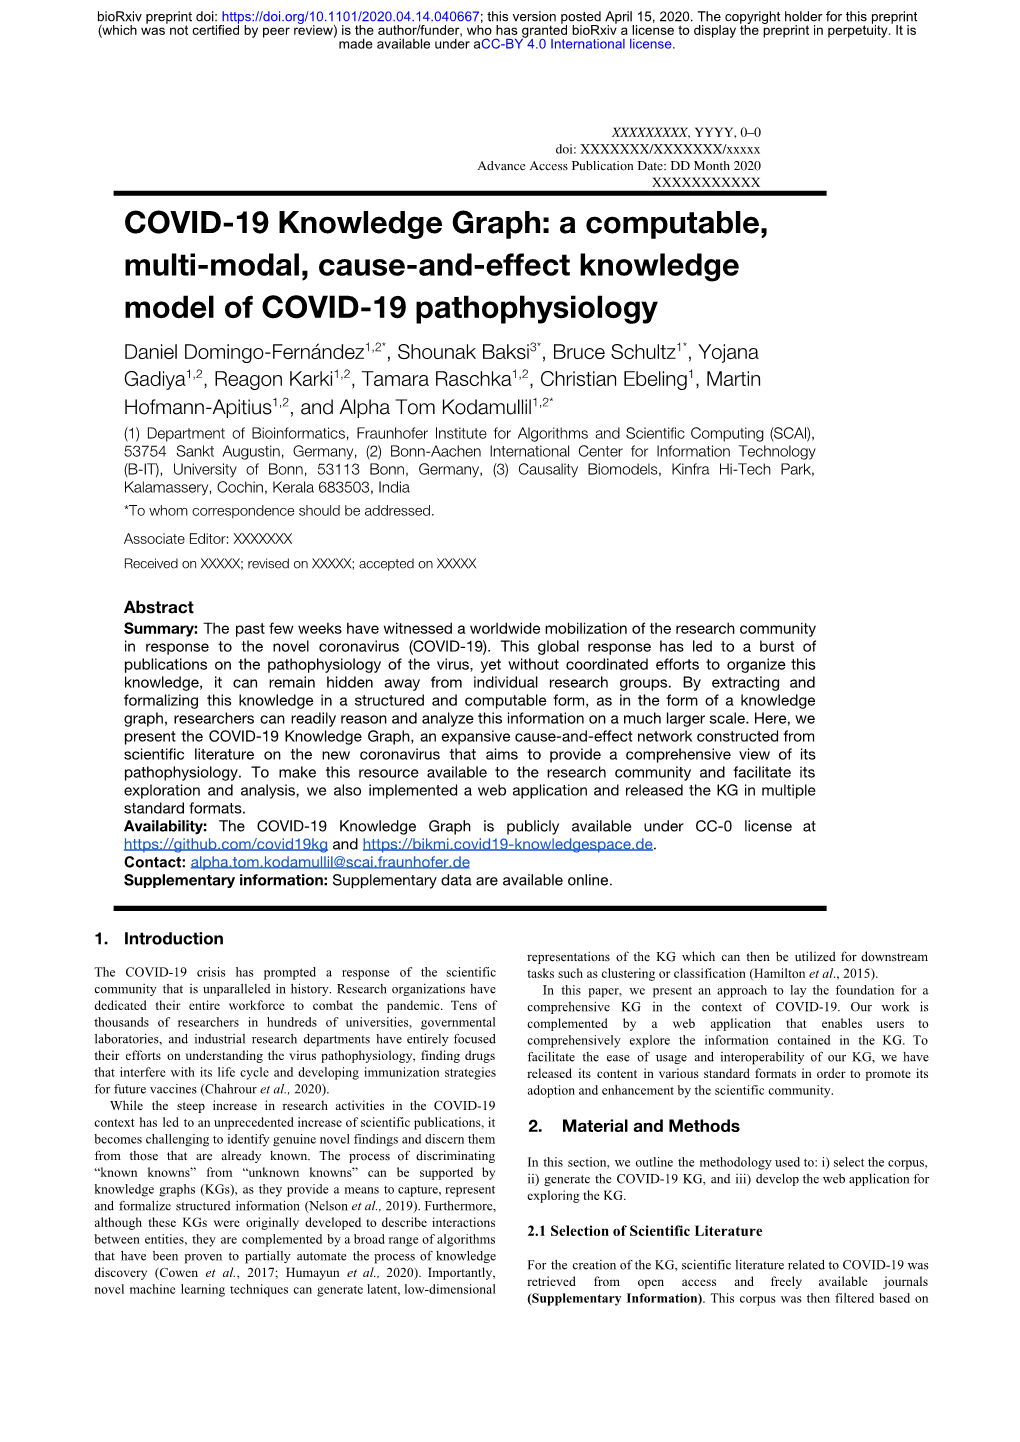 COVID-19 Knowledge Graph: a Computable, Multi-Modal, Cause-And-Effect Knowledge Model of COVID-19 Pathophysiology